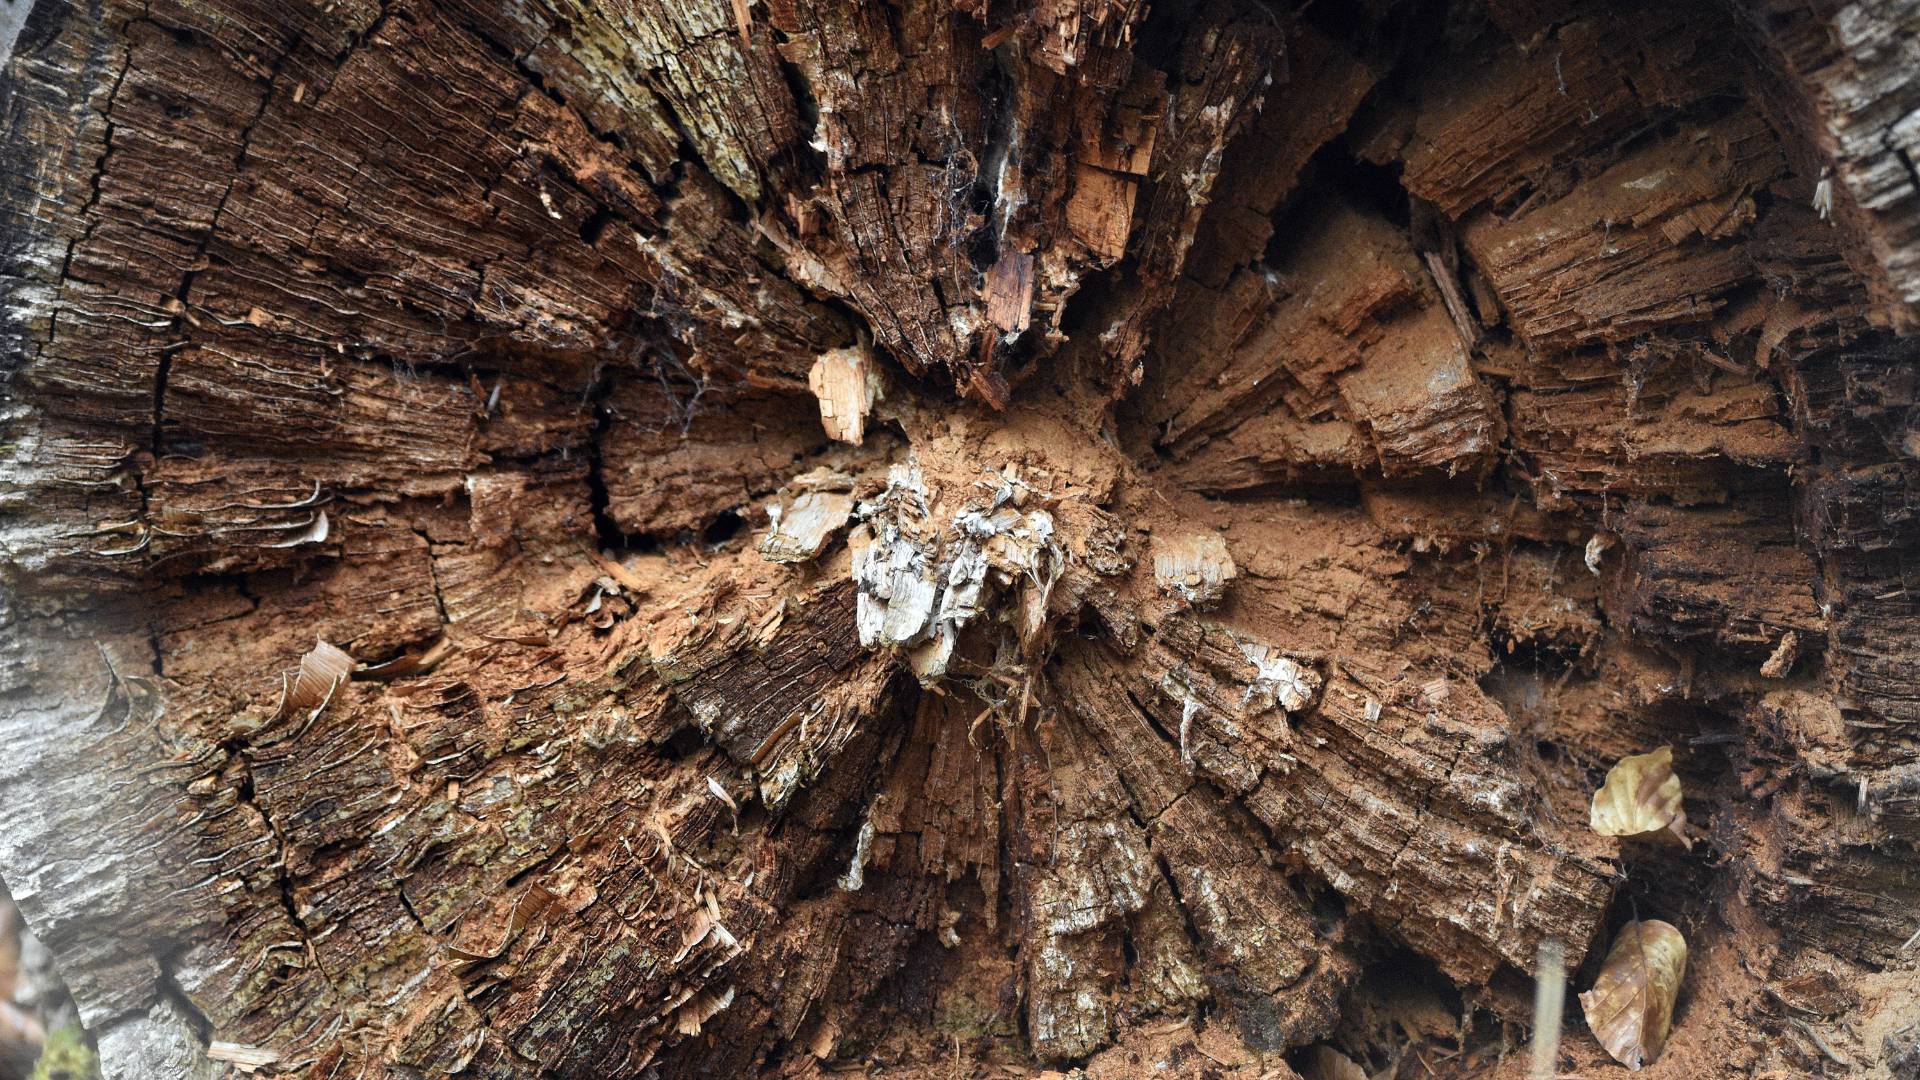 A large cross-section of a rotting trunk shows the brittle decay inside the tree.